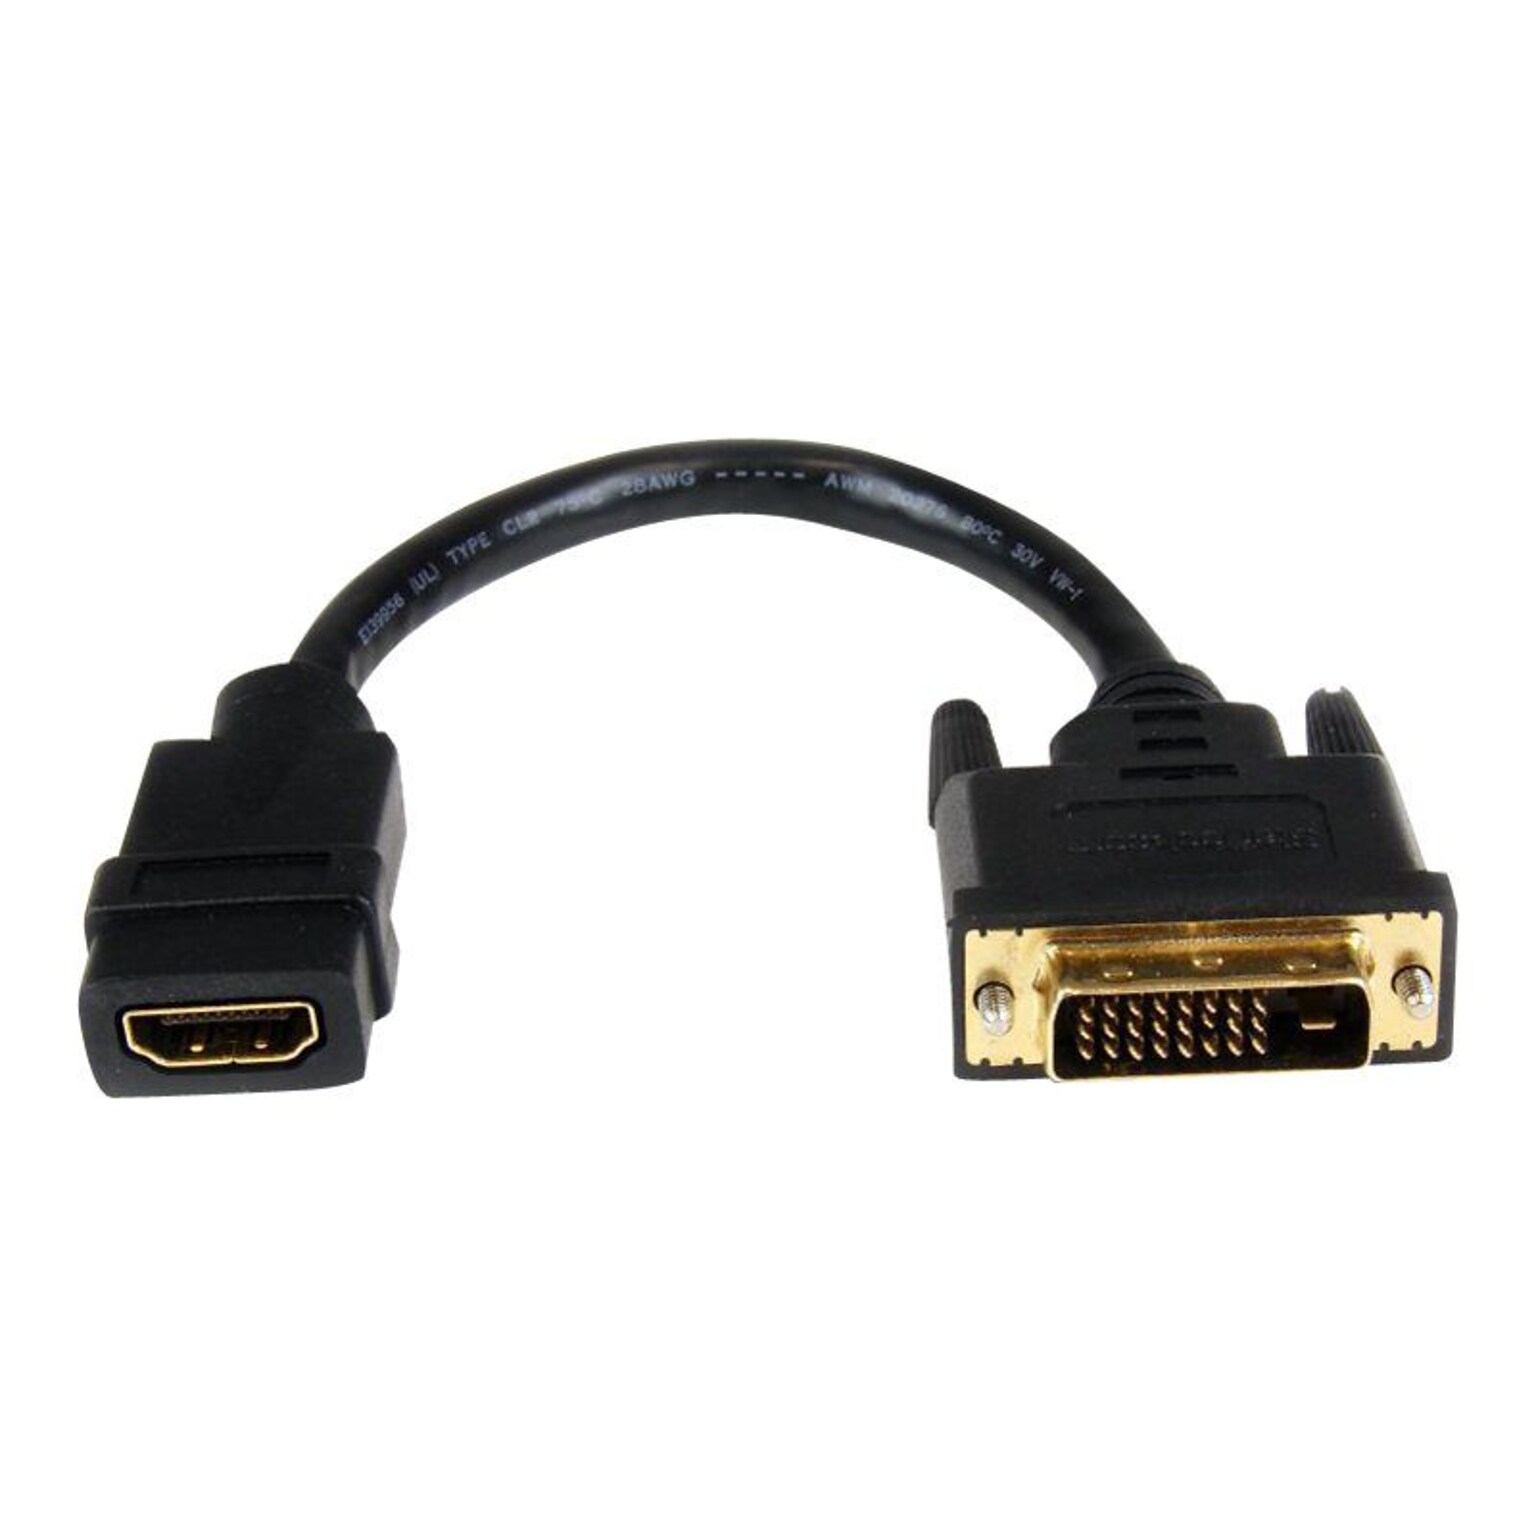 StarTech® 8 HDMI To DVI-D Female/Male Video Cable Adapter; Black